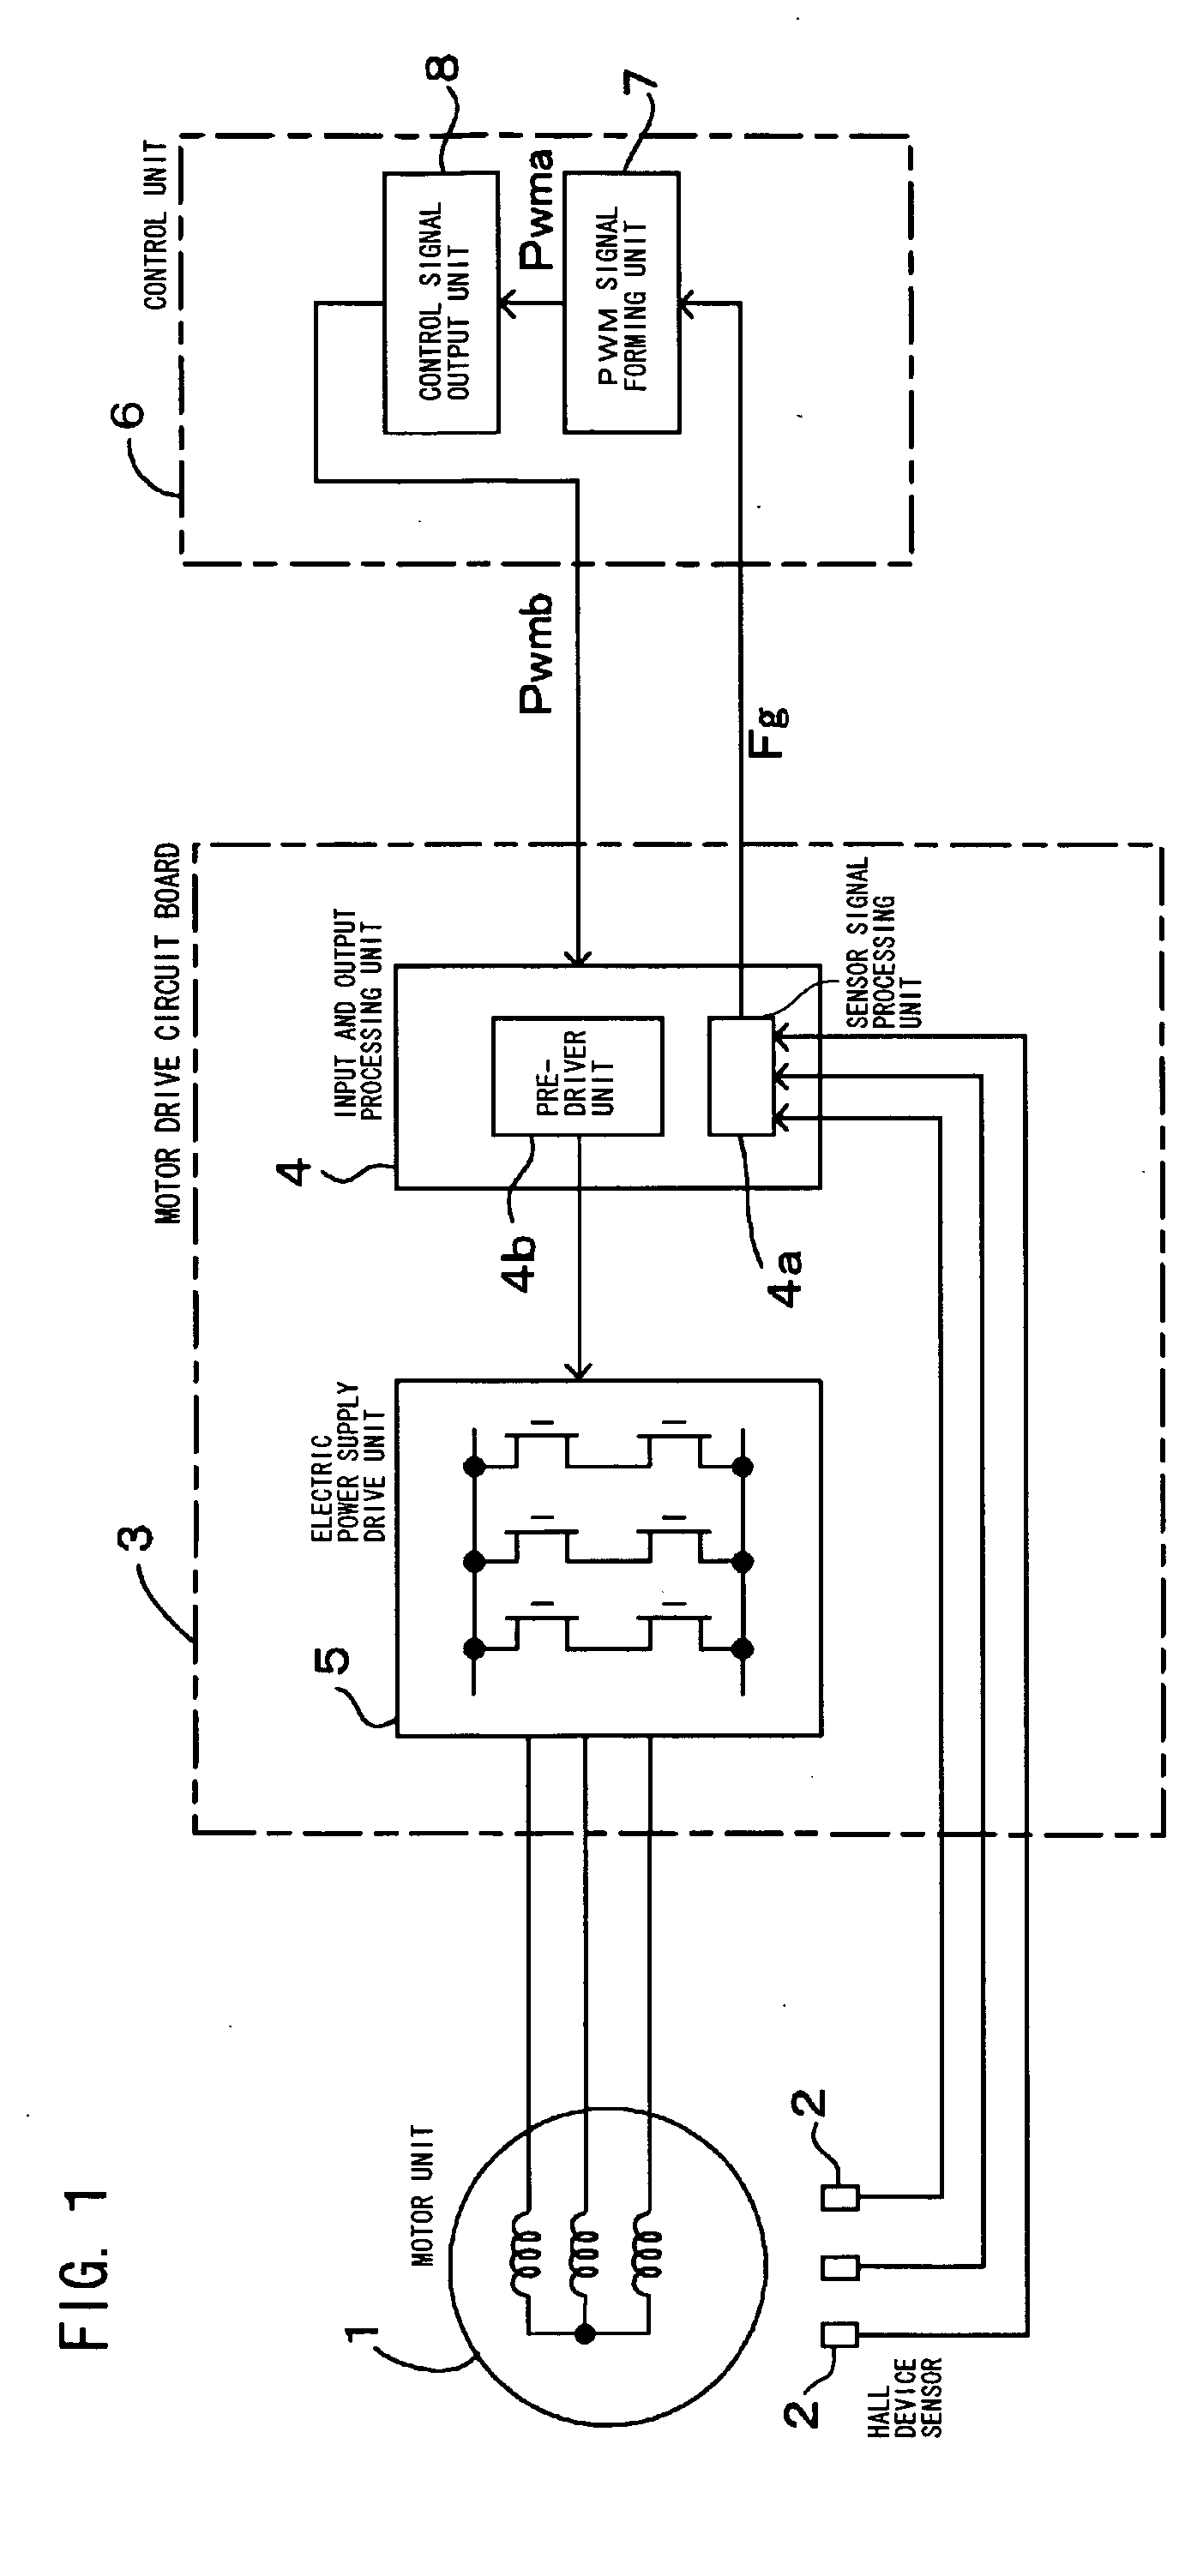 Method and apparatus for controlling motor drive